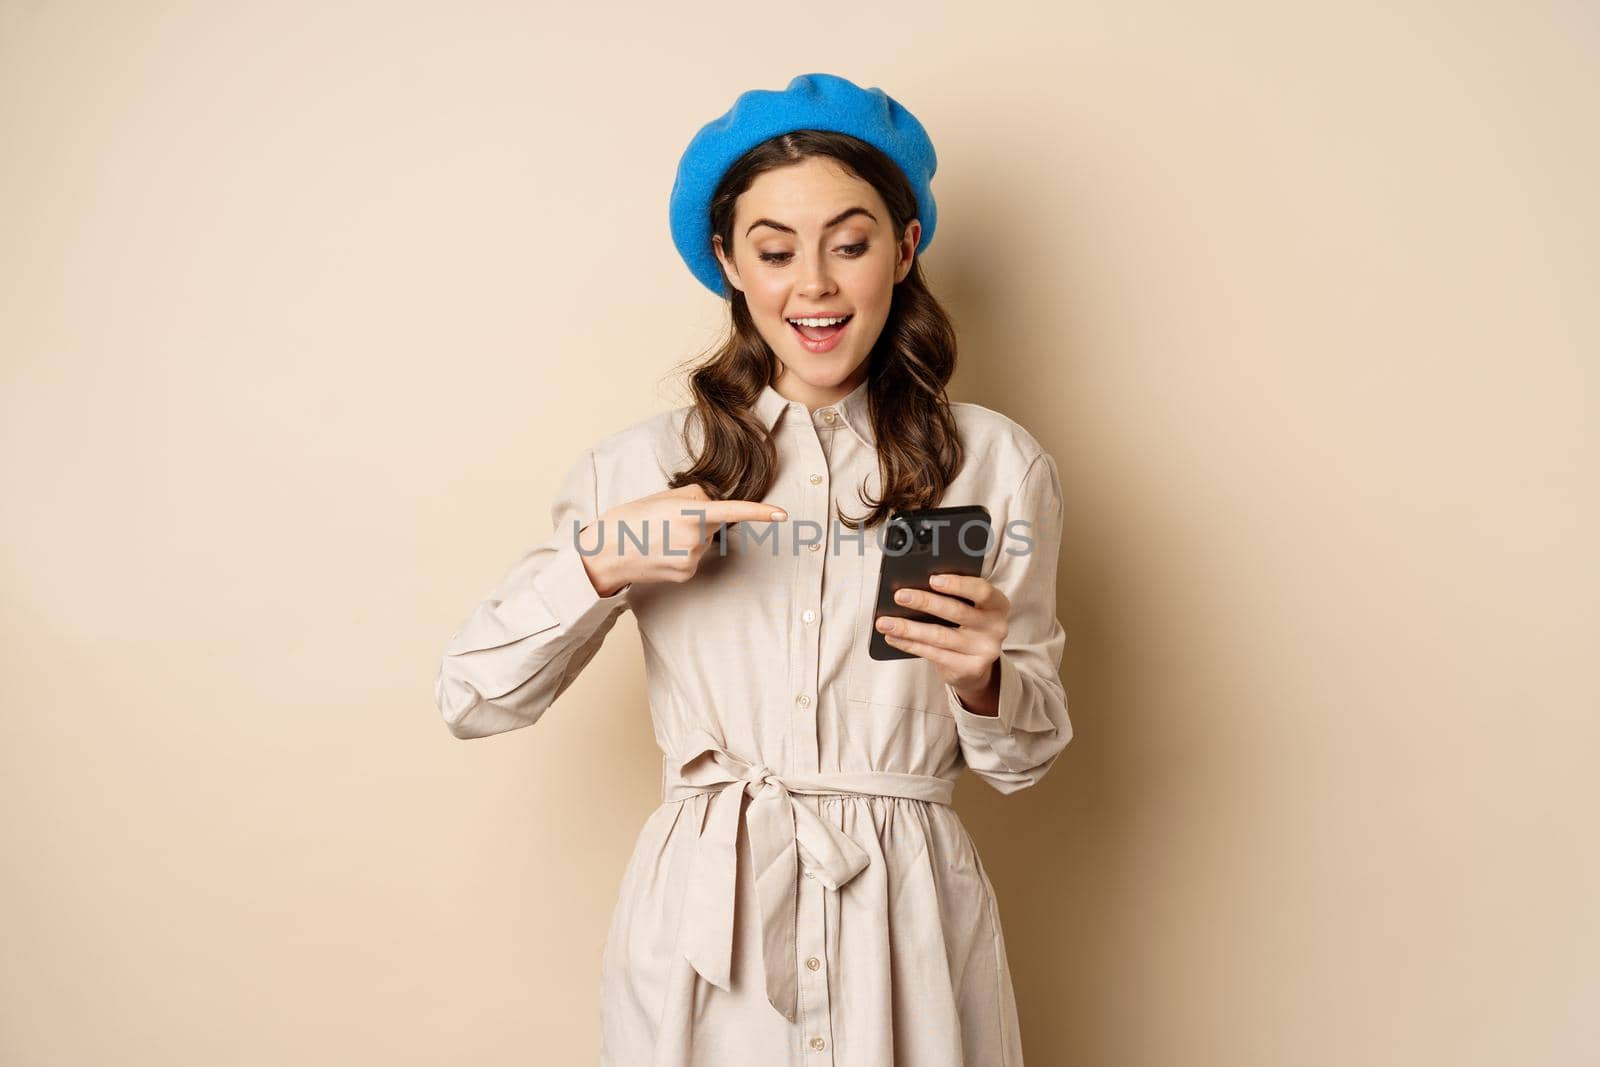 Portrait of stylish modern woman in outerwear, pointing at mobile phone screen and looking happy, smiling pleased, standing over beige background.